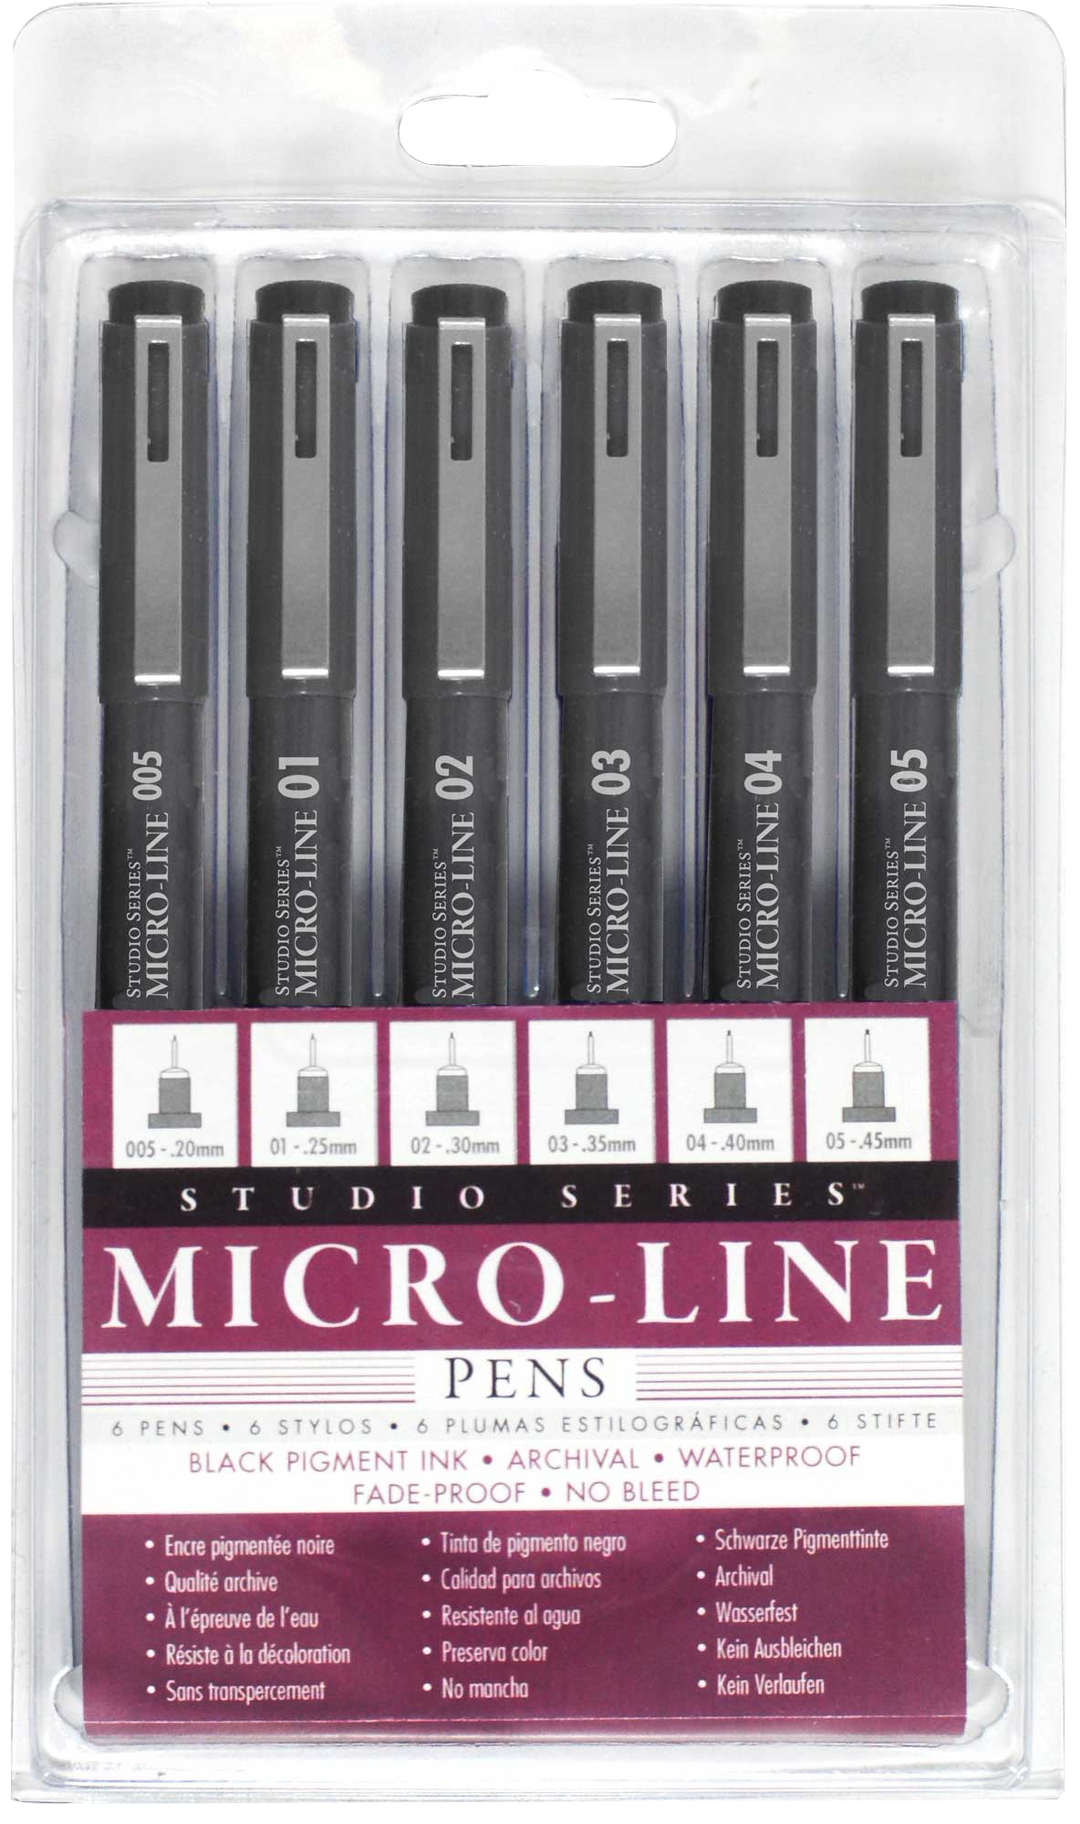 Photo of the Studio Series Microline Pen Set in its retail packaging.